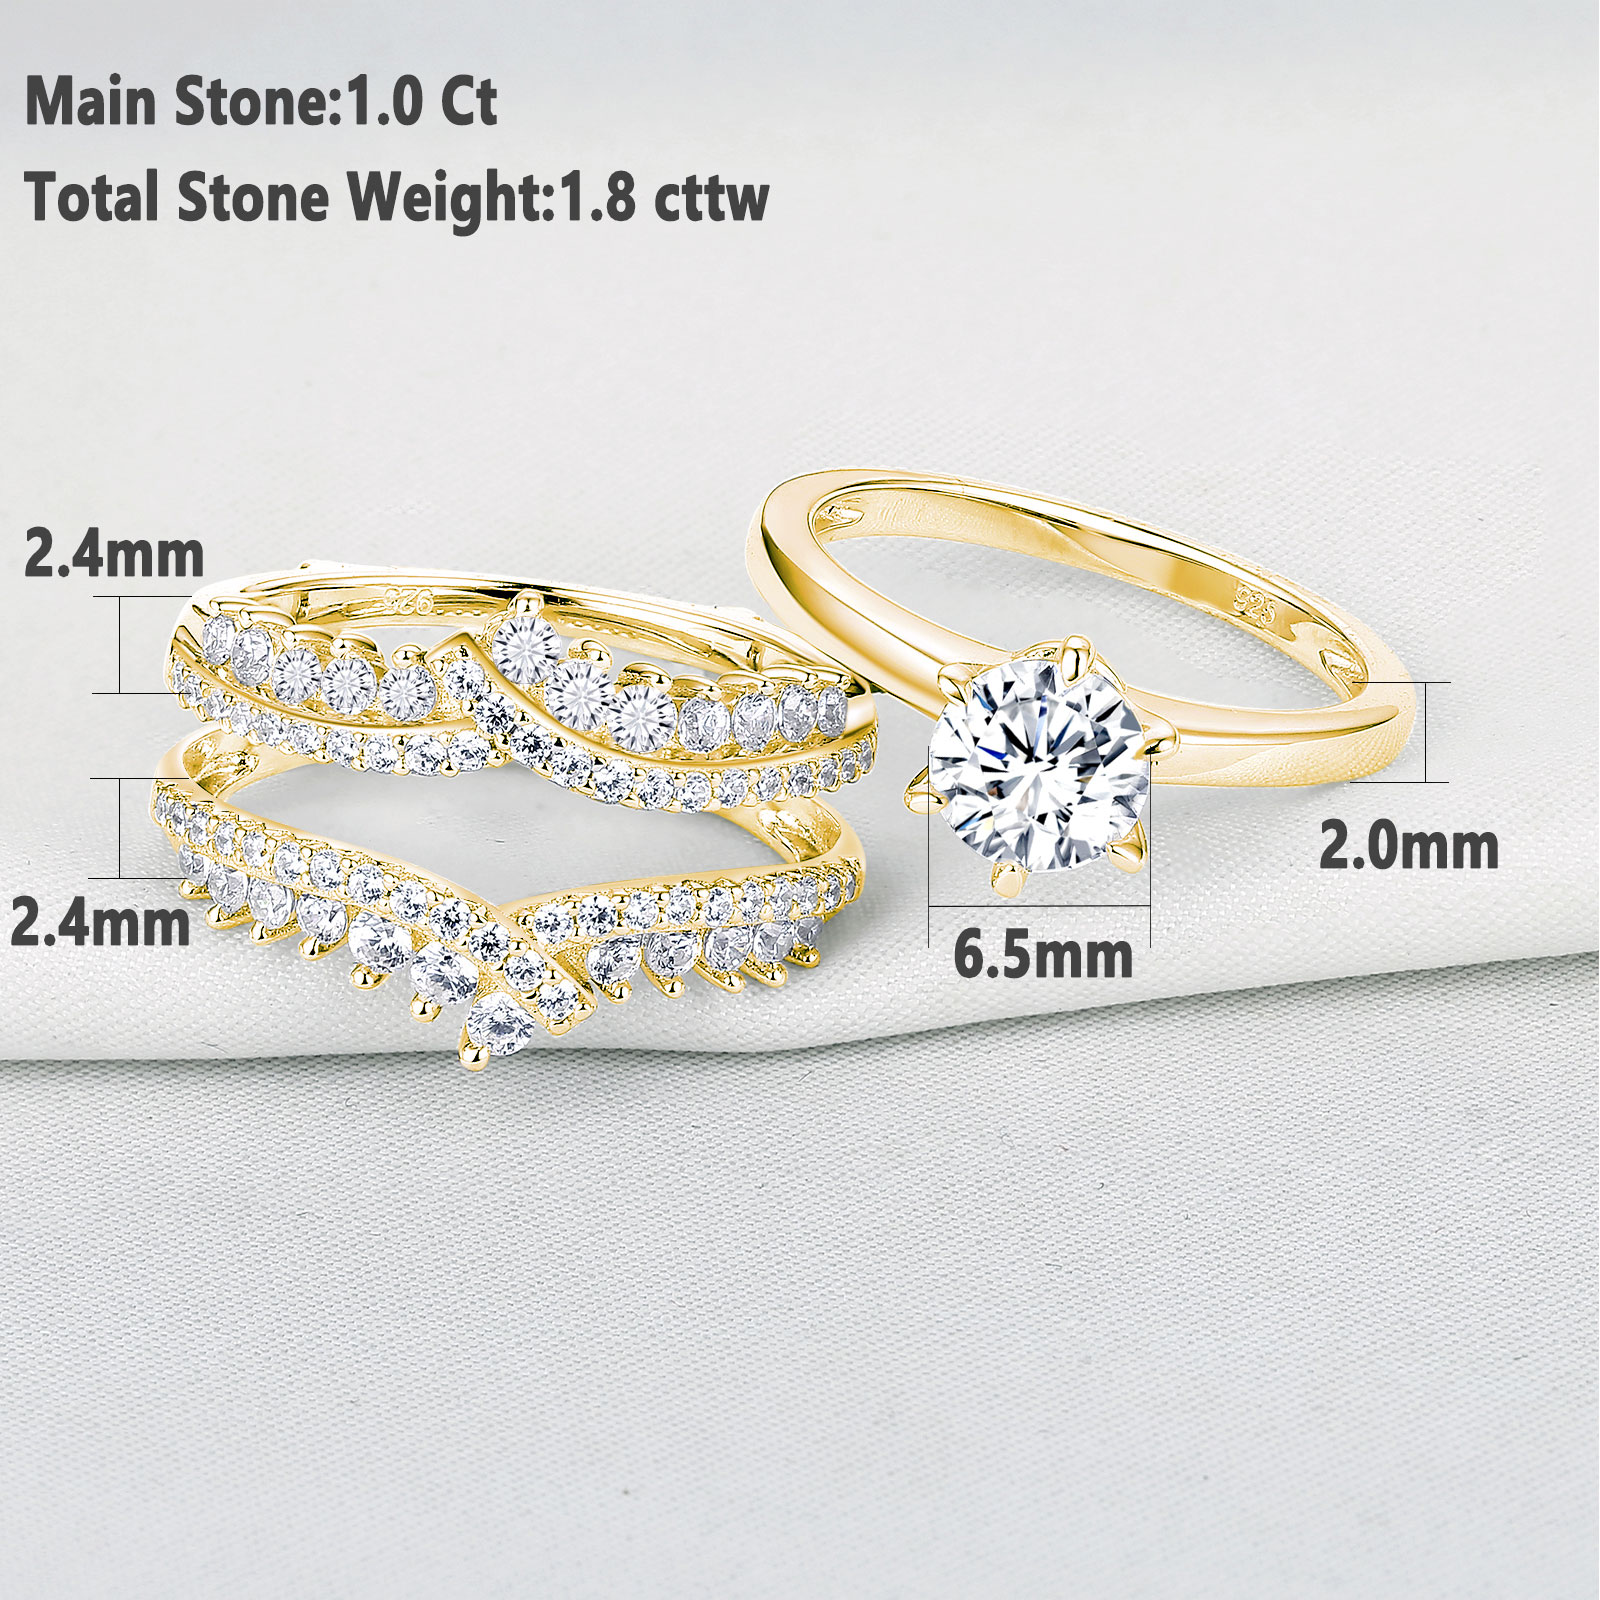 Newshe Wedding Rings for Women Engagement Ring Enhancer Band Bridal Set Sterling Silver 1.8Ct Cz Yellow Gold Size 9.5 - image 3 of 7